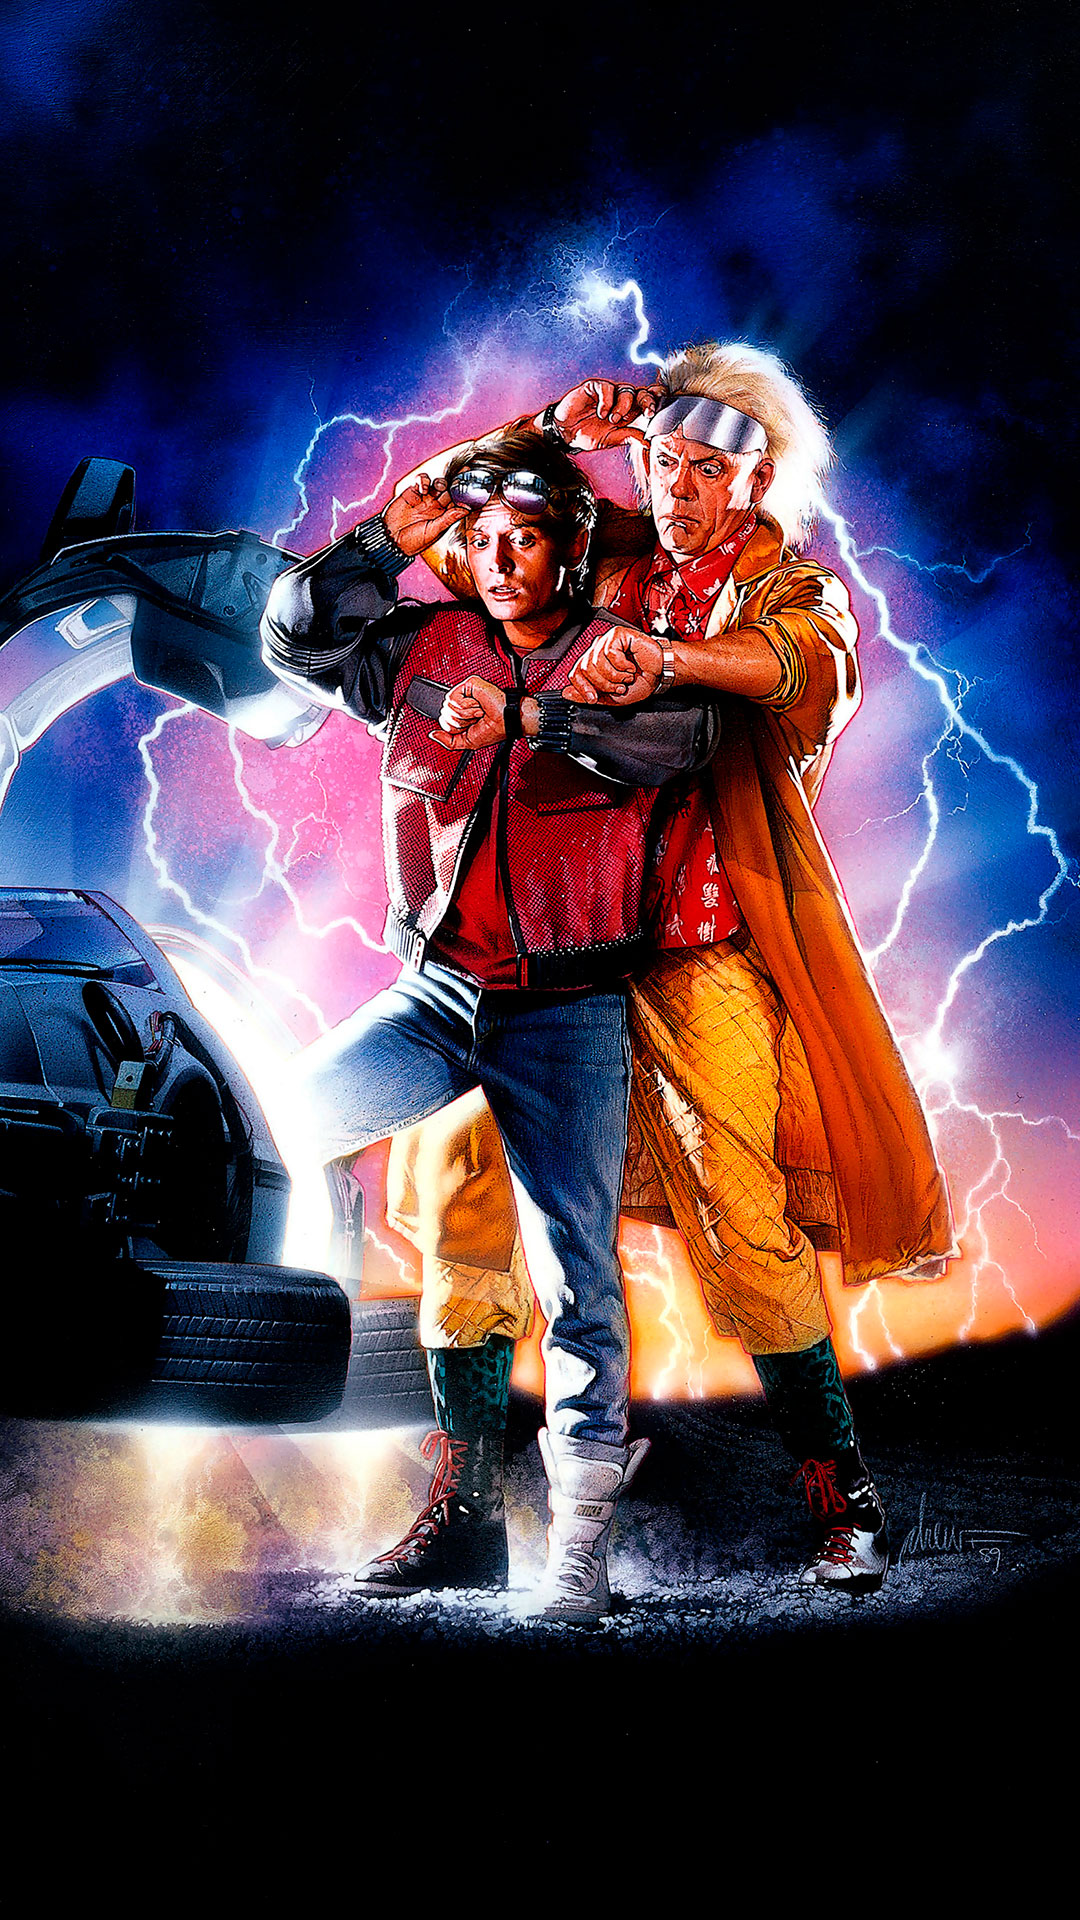 Back to the Future Wallpaper for iPhone Pro Max, X, 6